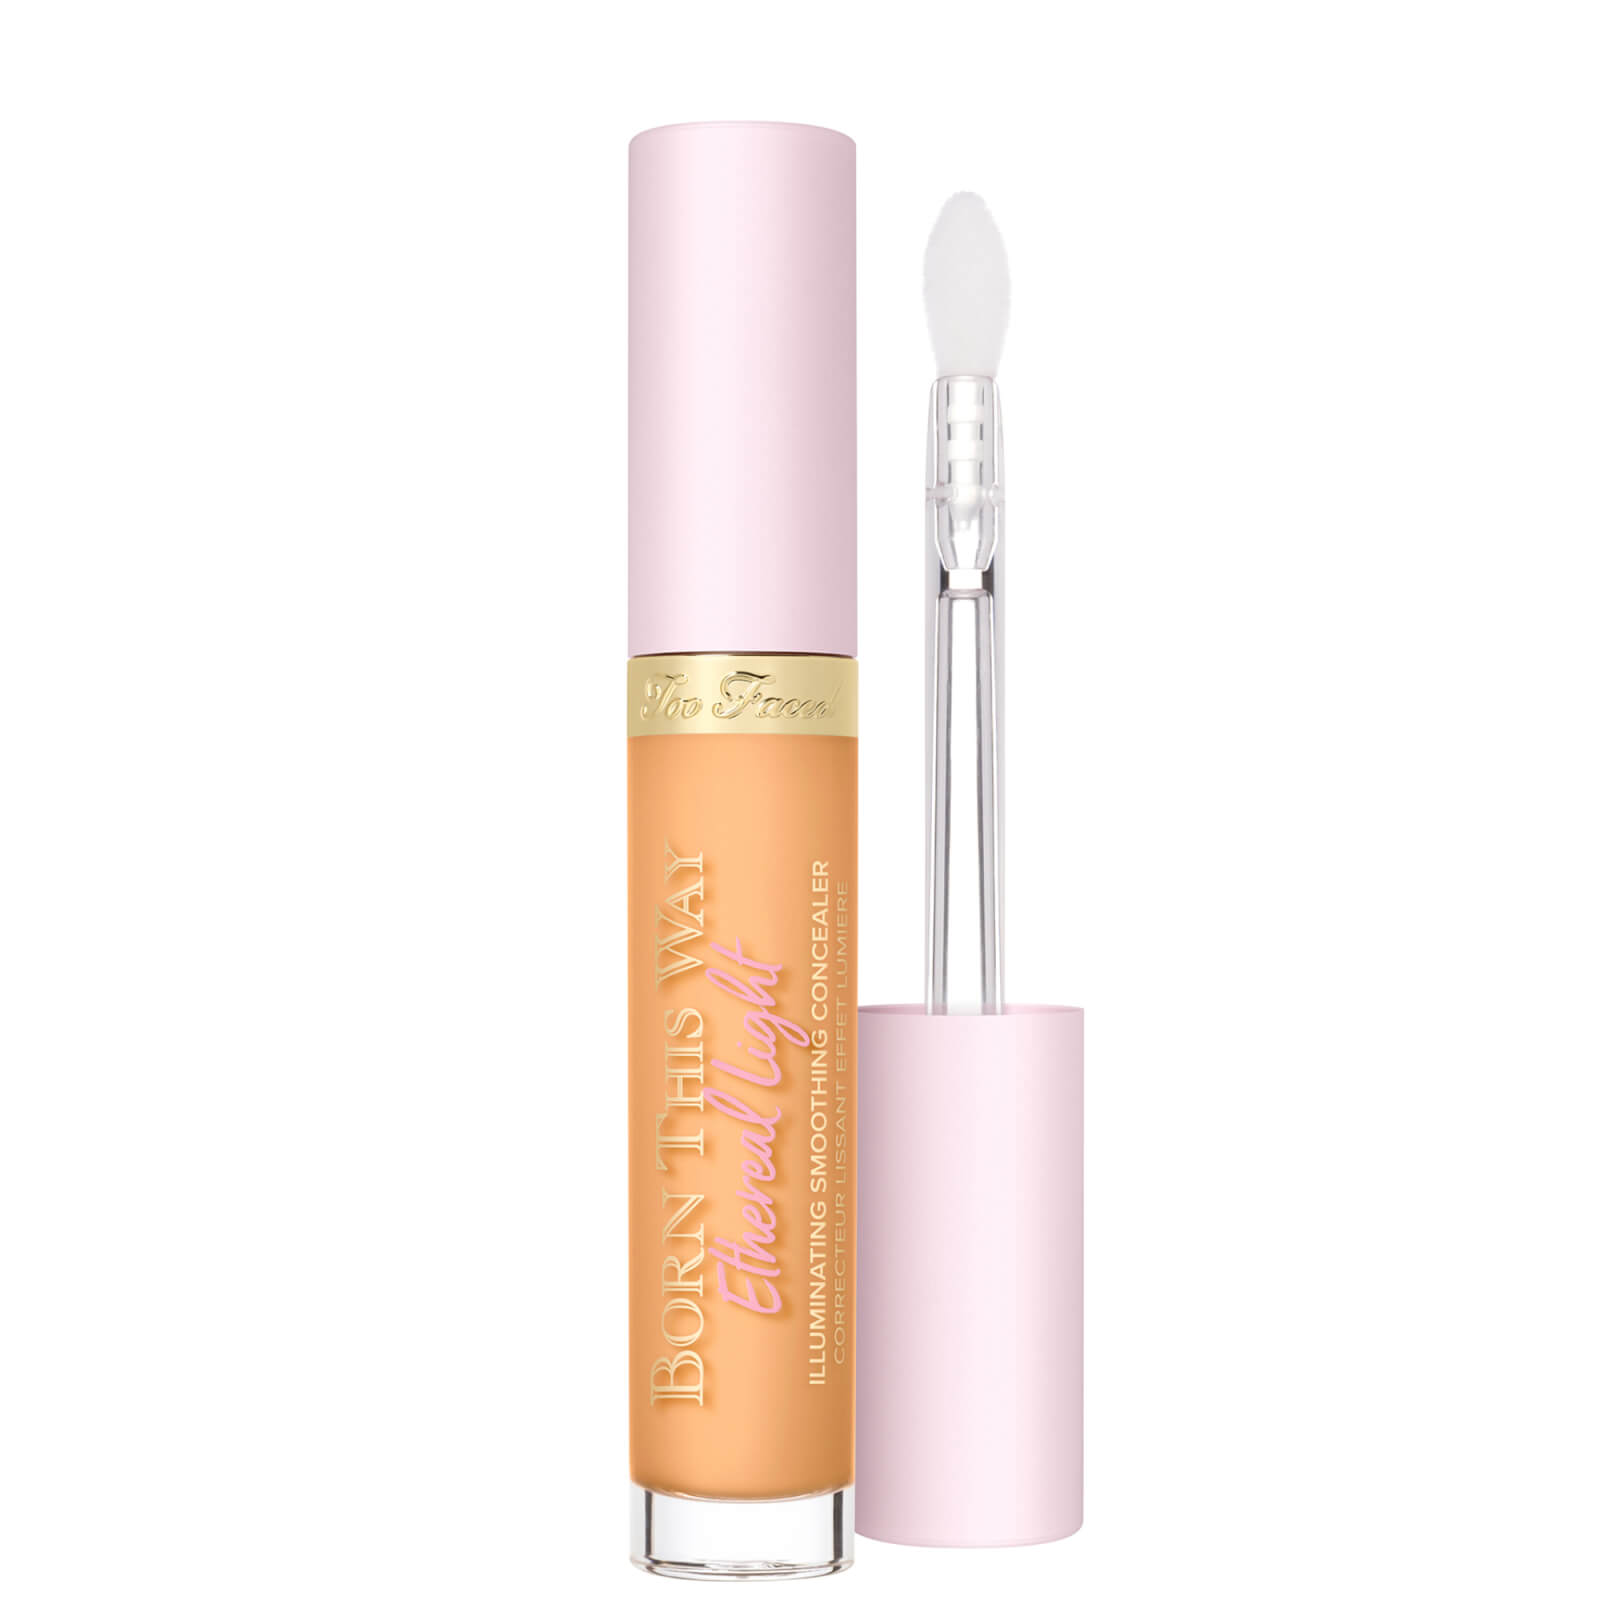 Too Faced Born This Way Ethereal Light Illuminating Smoothing Concealer 15ml (Various Shades) - Biscotti